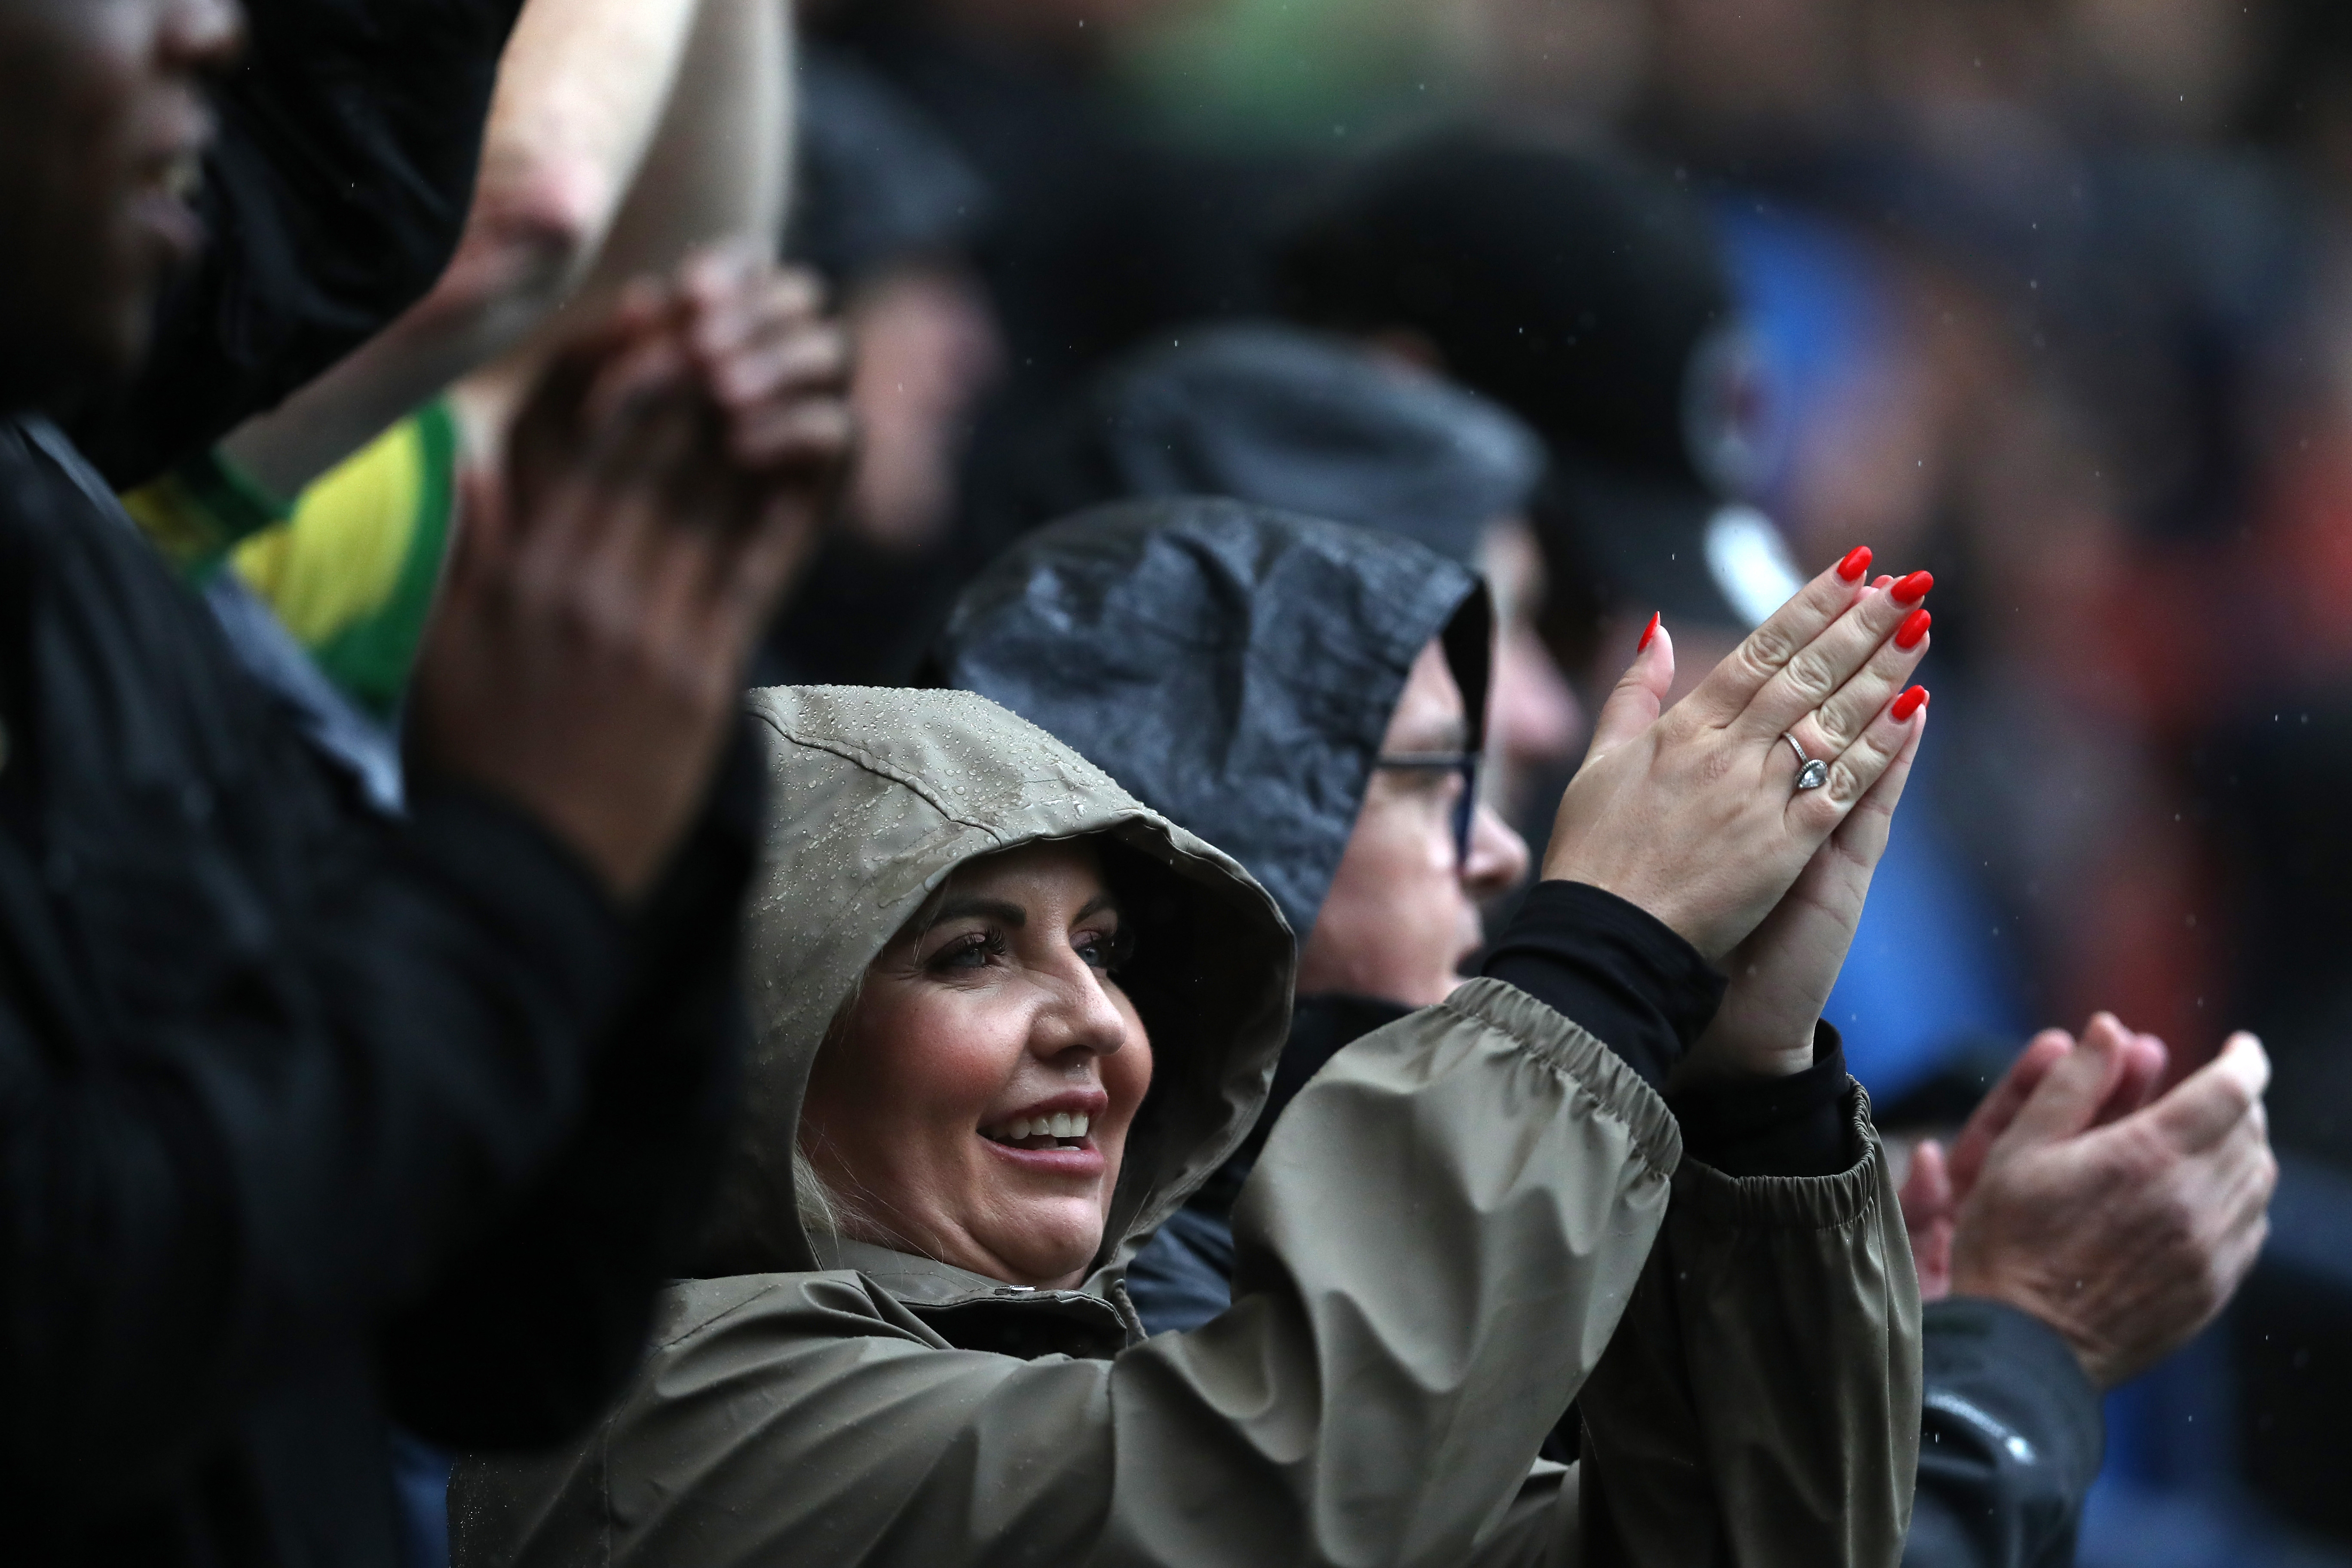 A female Albion fan clapping